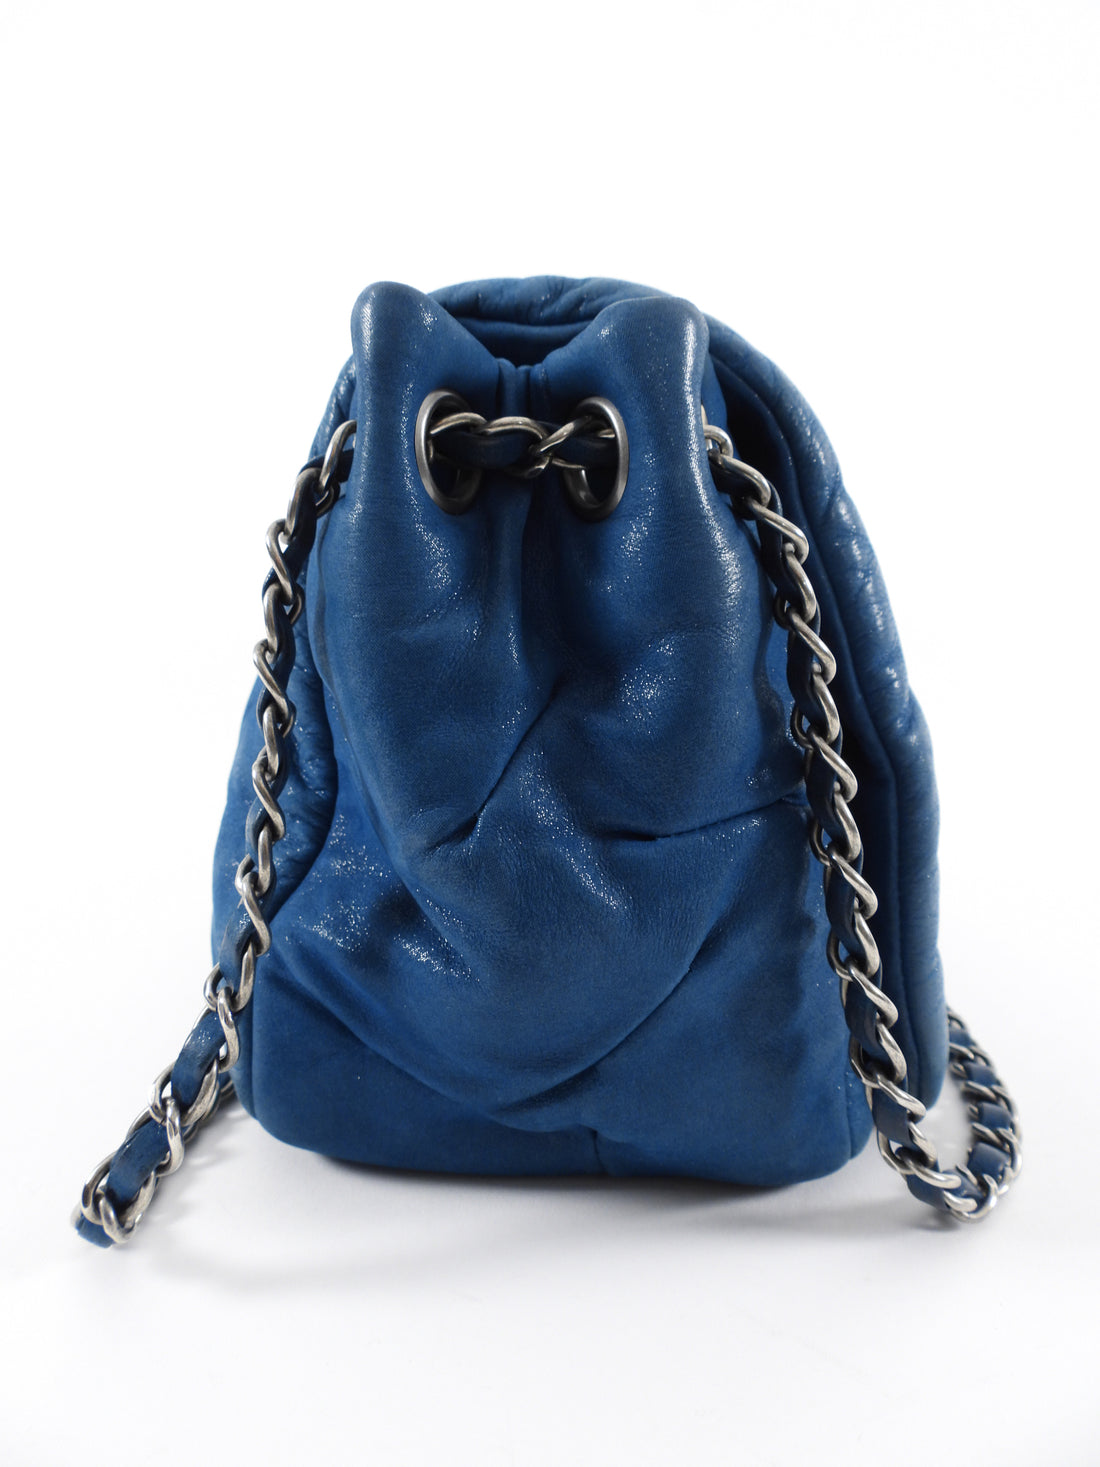 Chanel Teal Blue Pleated Leather CC Chain Flap Bag